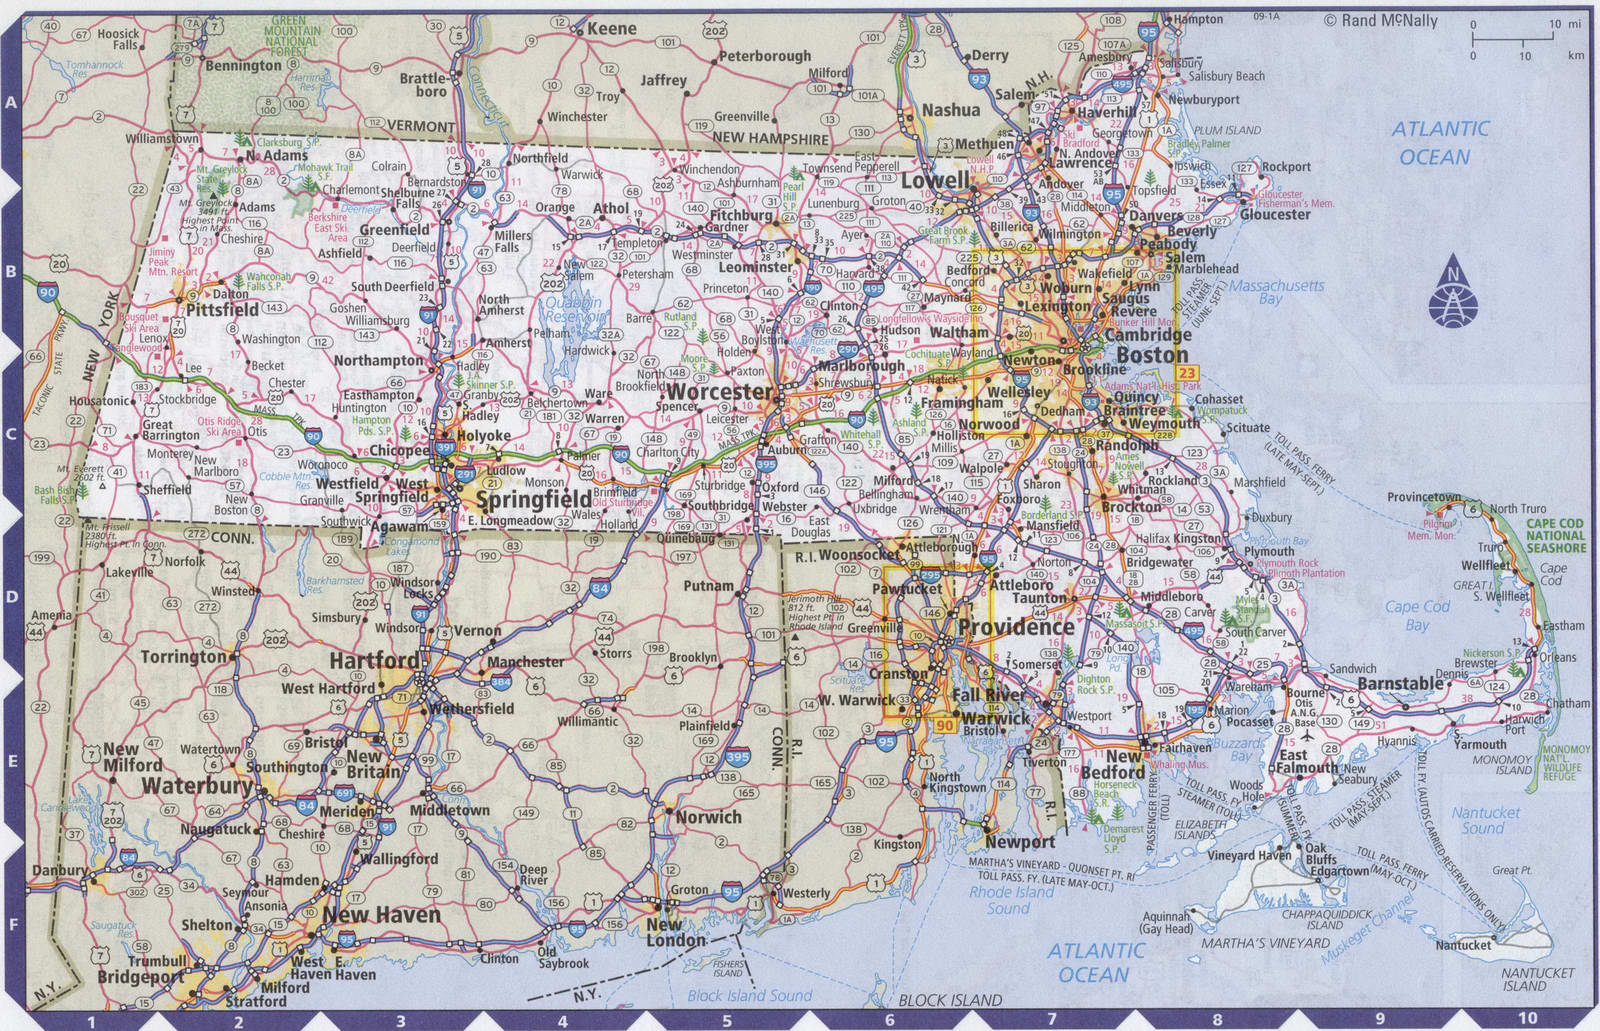 Massachusetts state complete map